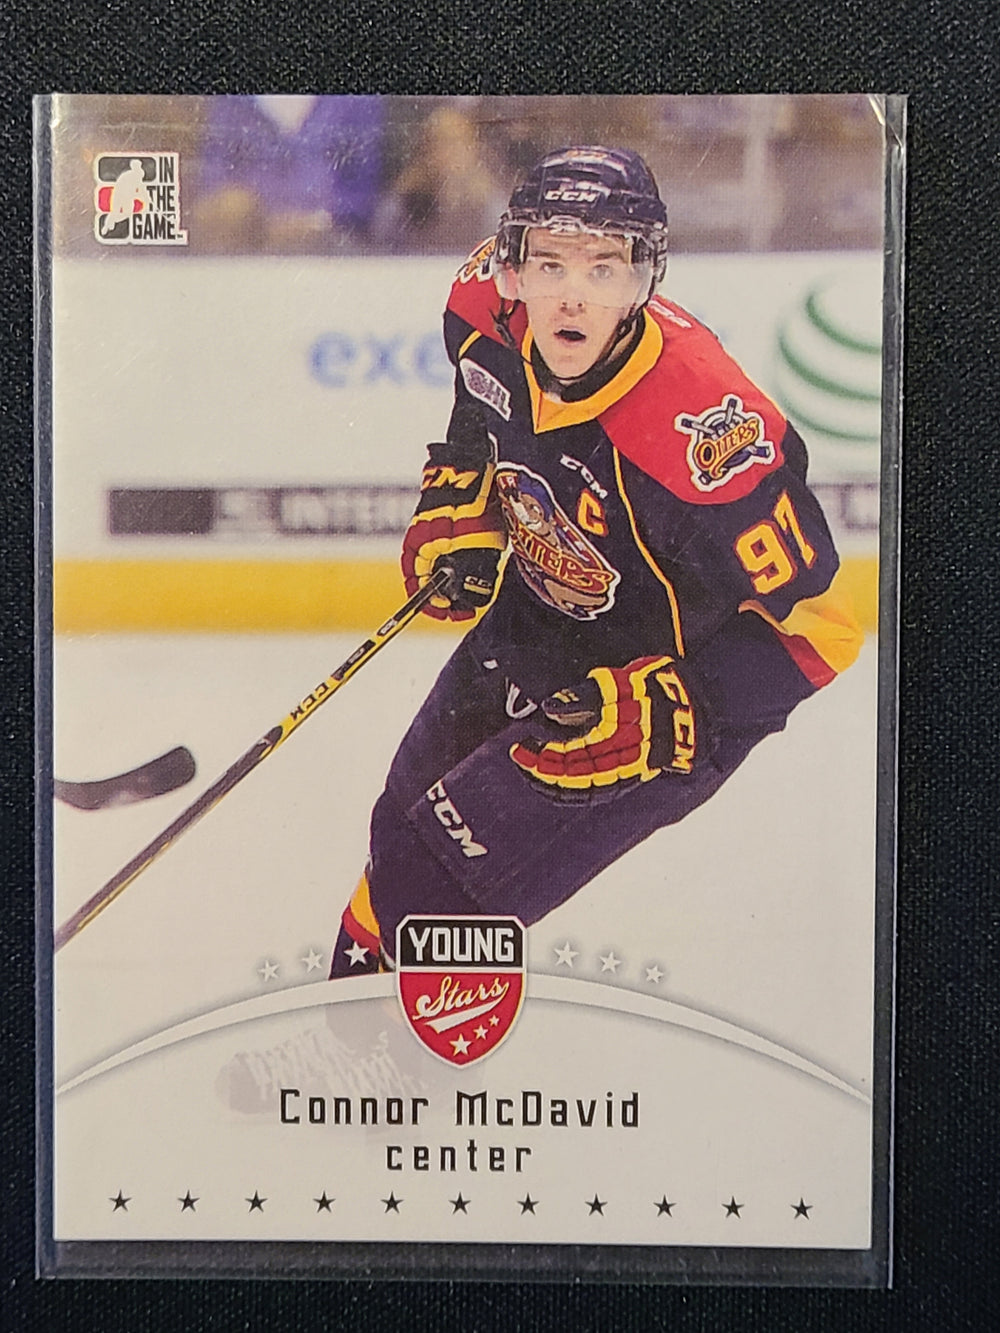 2014-15 ITG In The Game CHL Young Stars #21 Connor McDavid